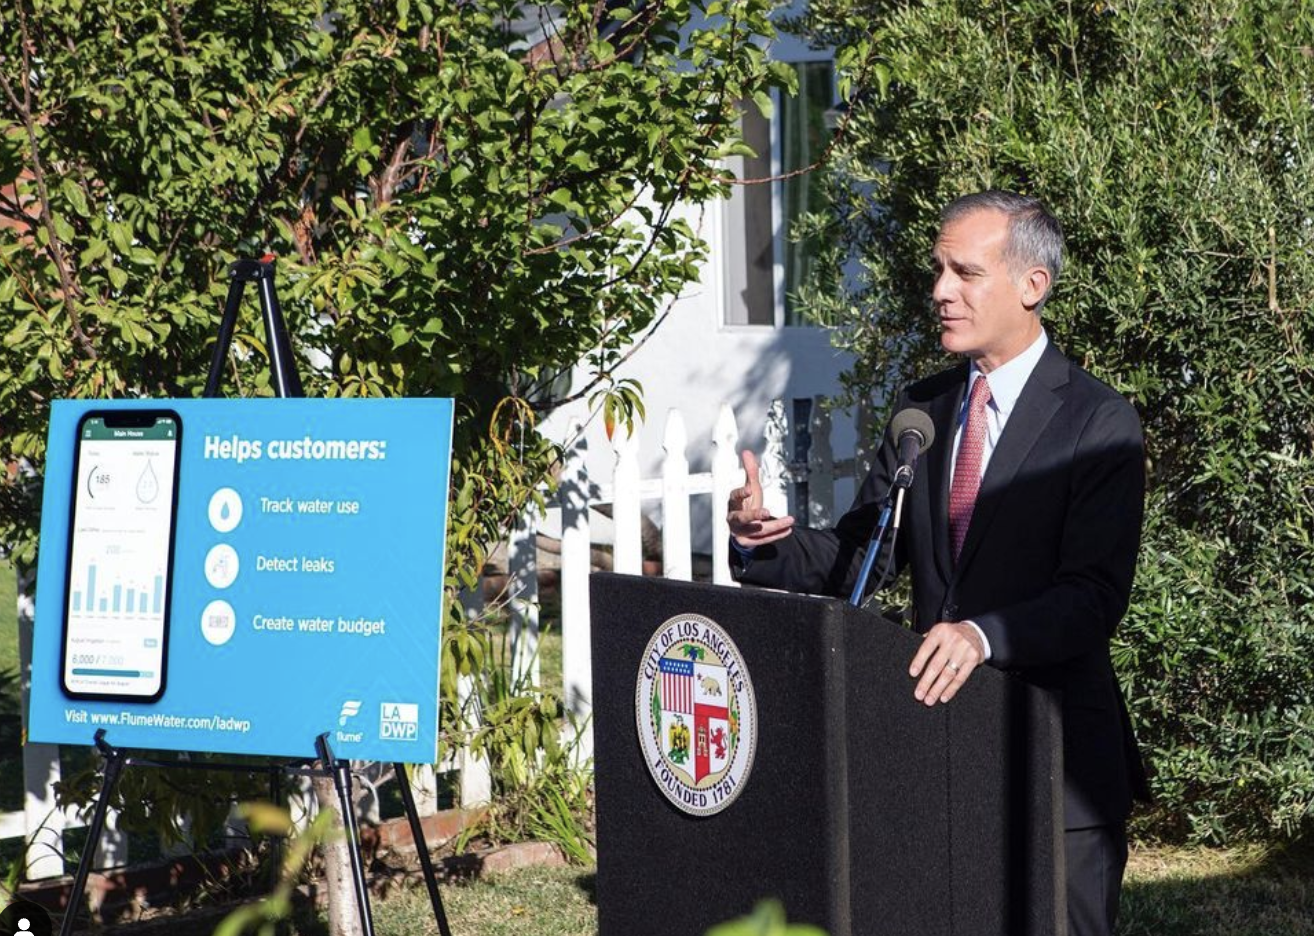 Flume Launches Landmark Program to Fight Drought With LADWP